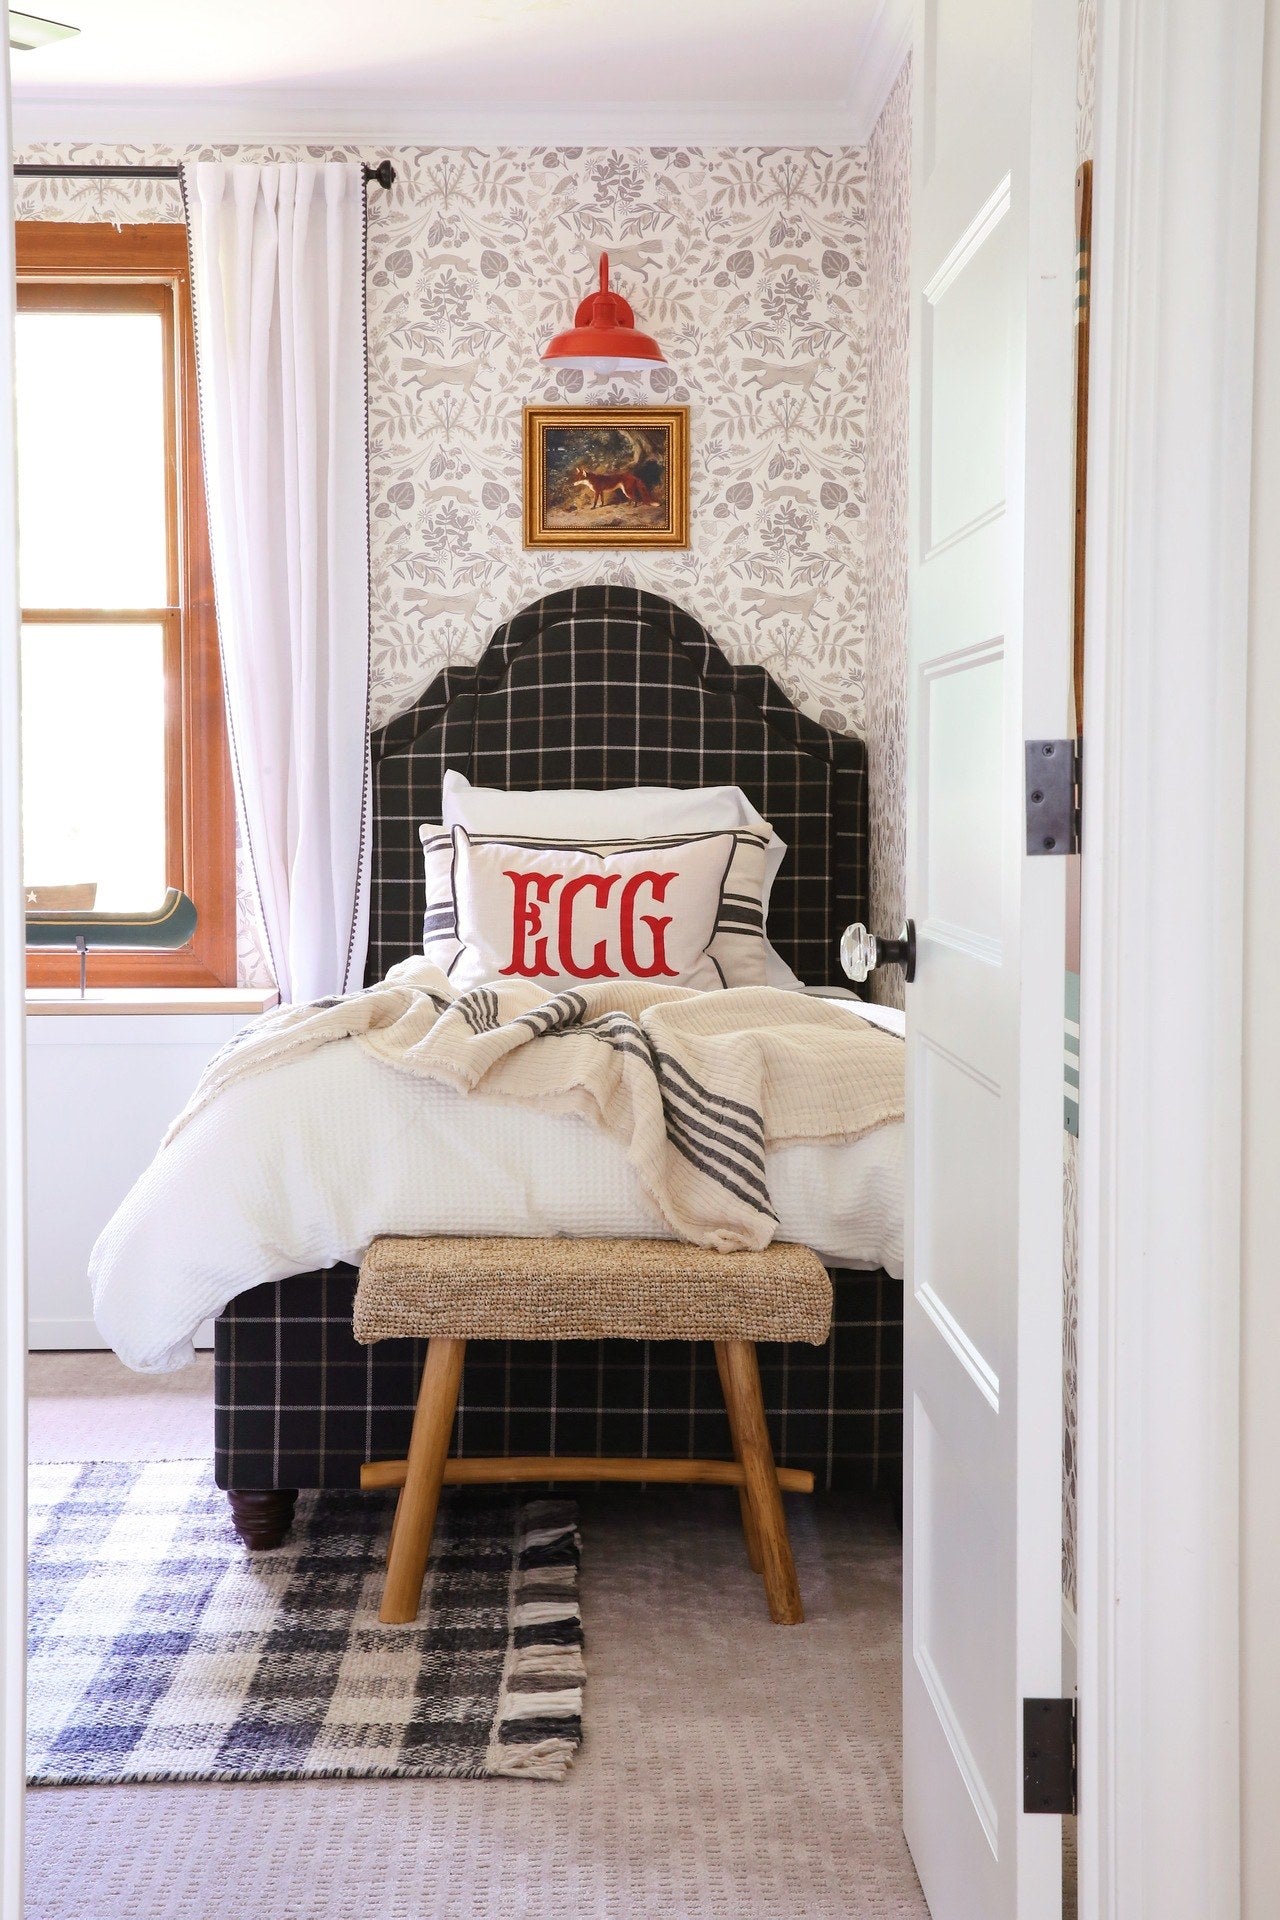 A view through the doorway into this classic, yet quirky bedroom.